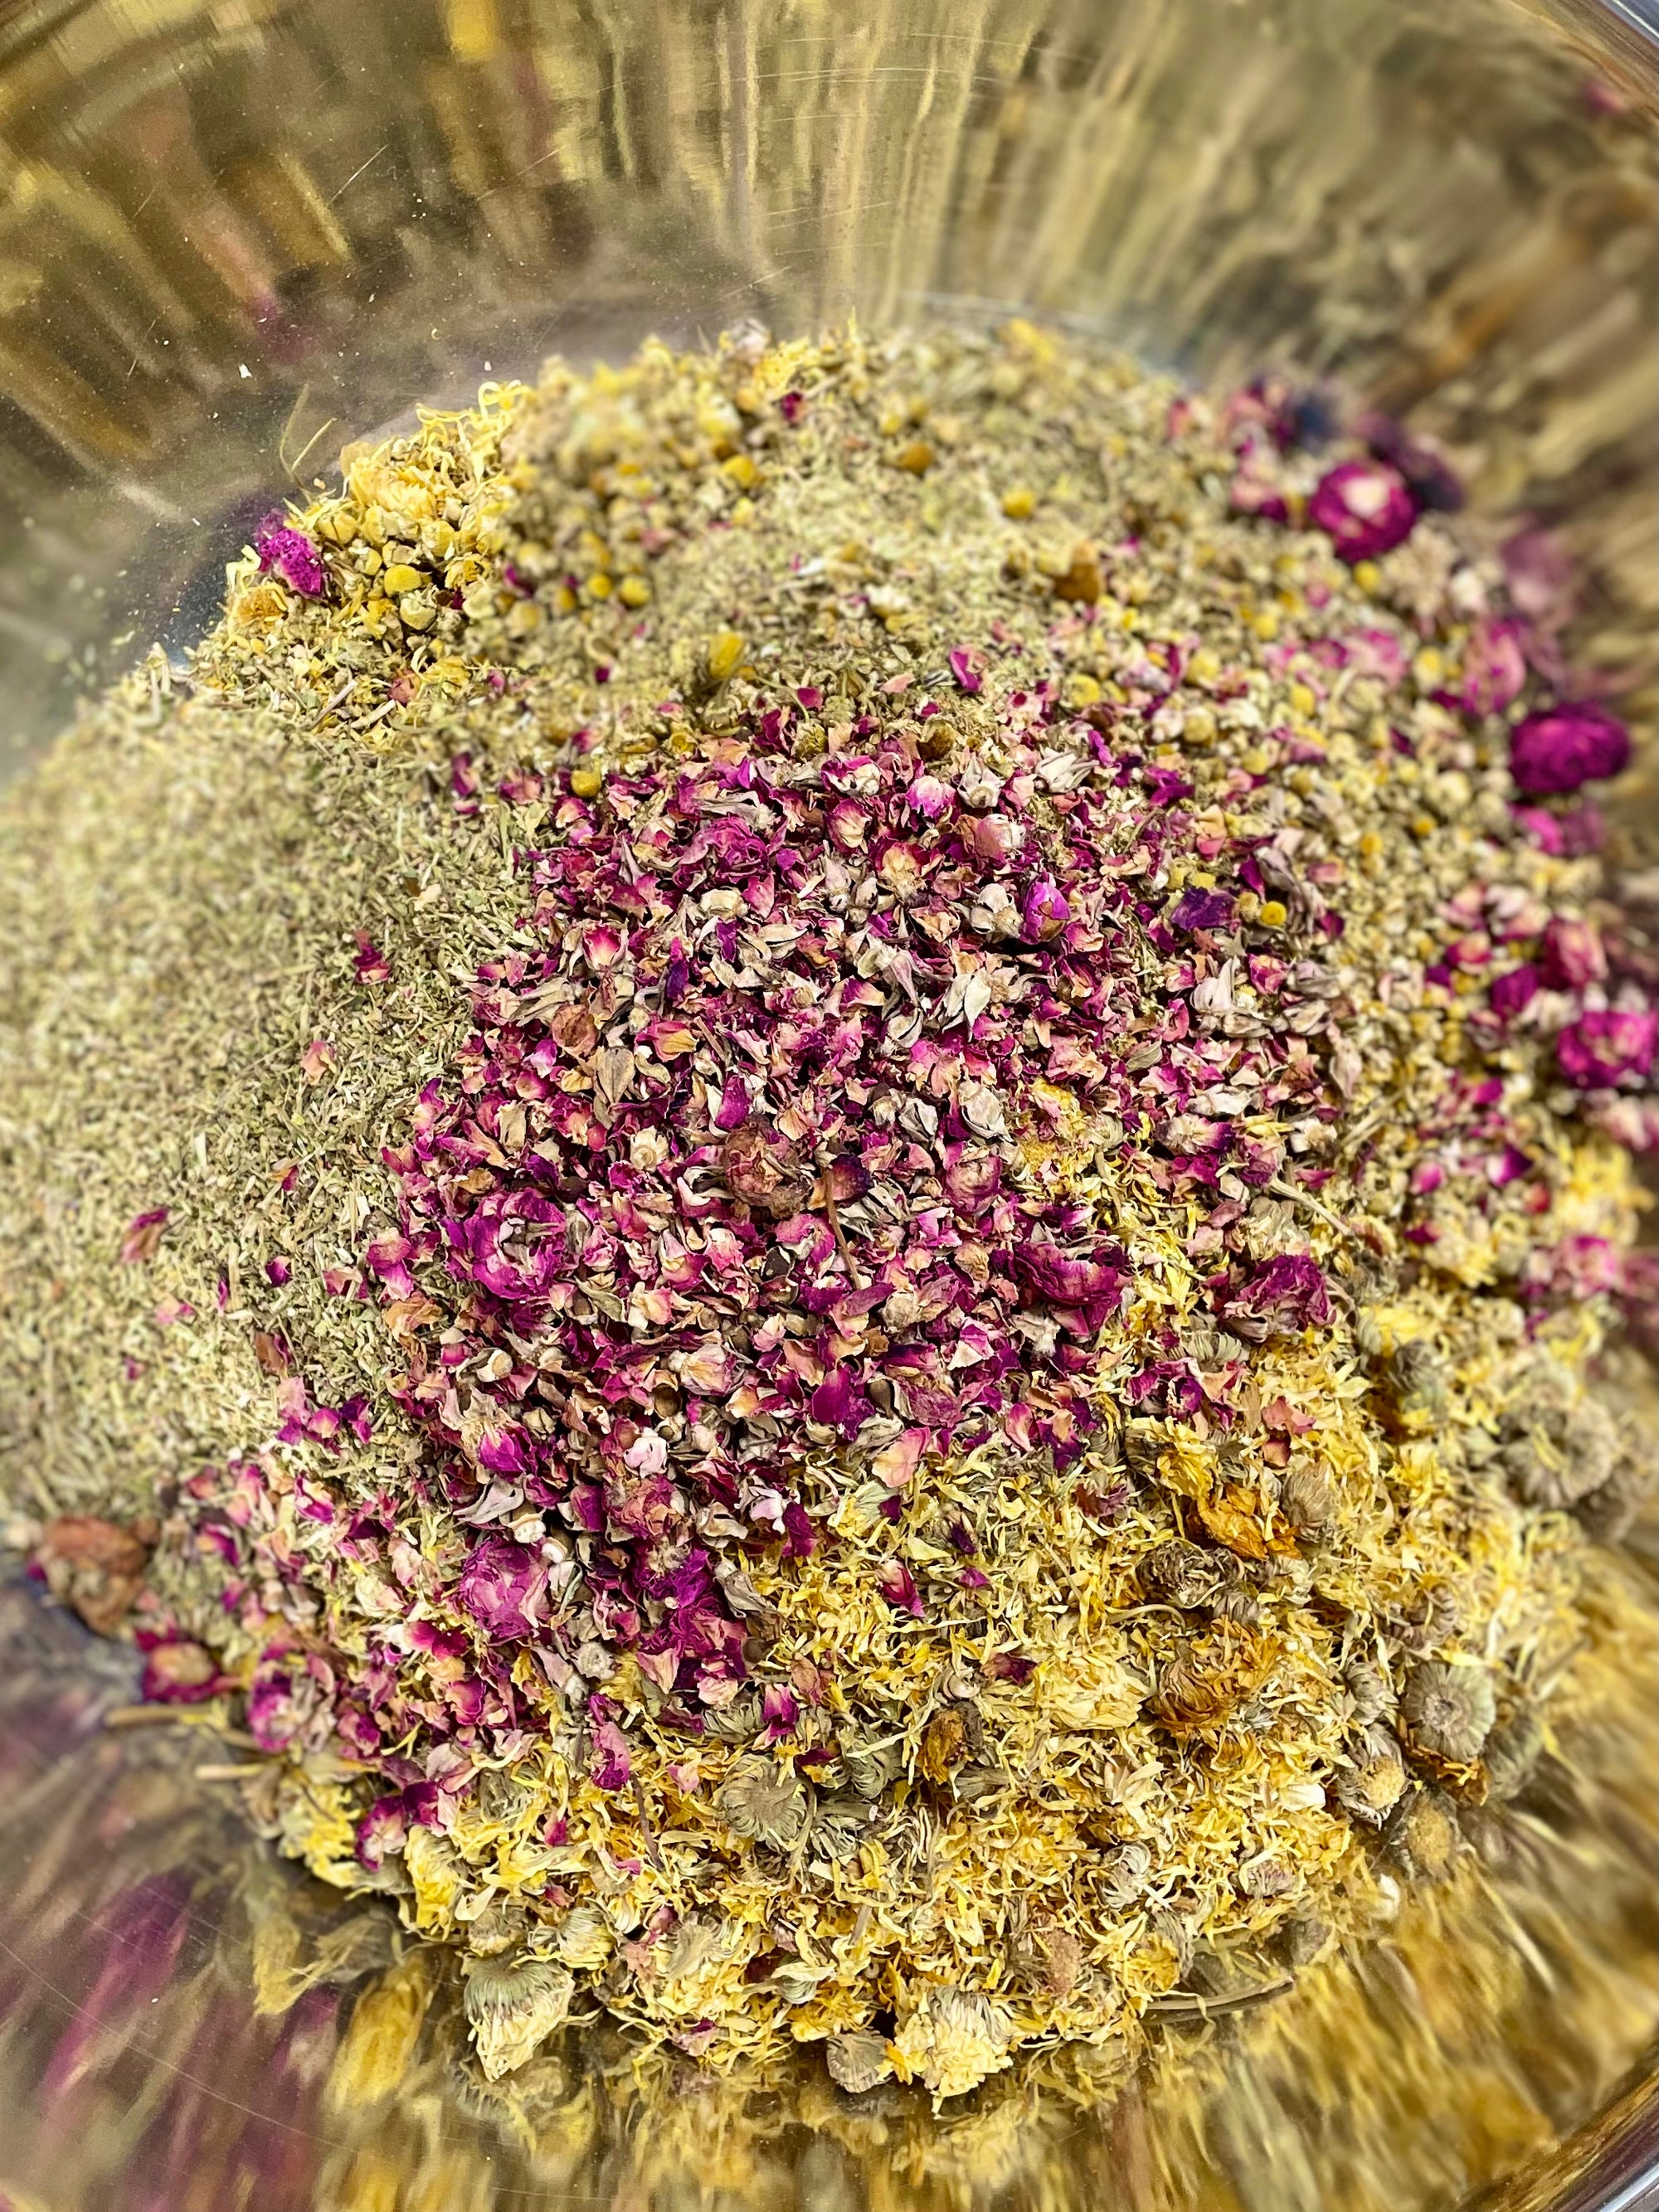 Homemade Bath Tea that is Rose scented and promotes relaxation!